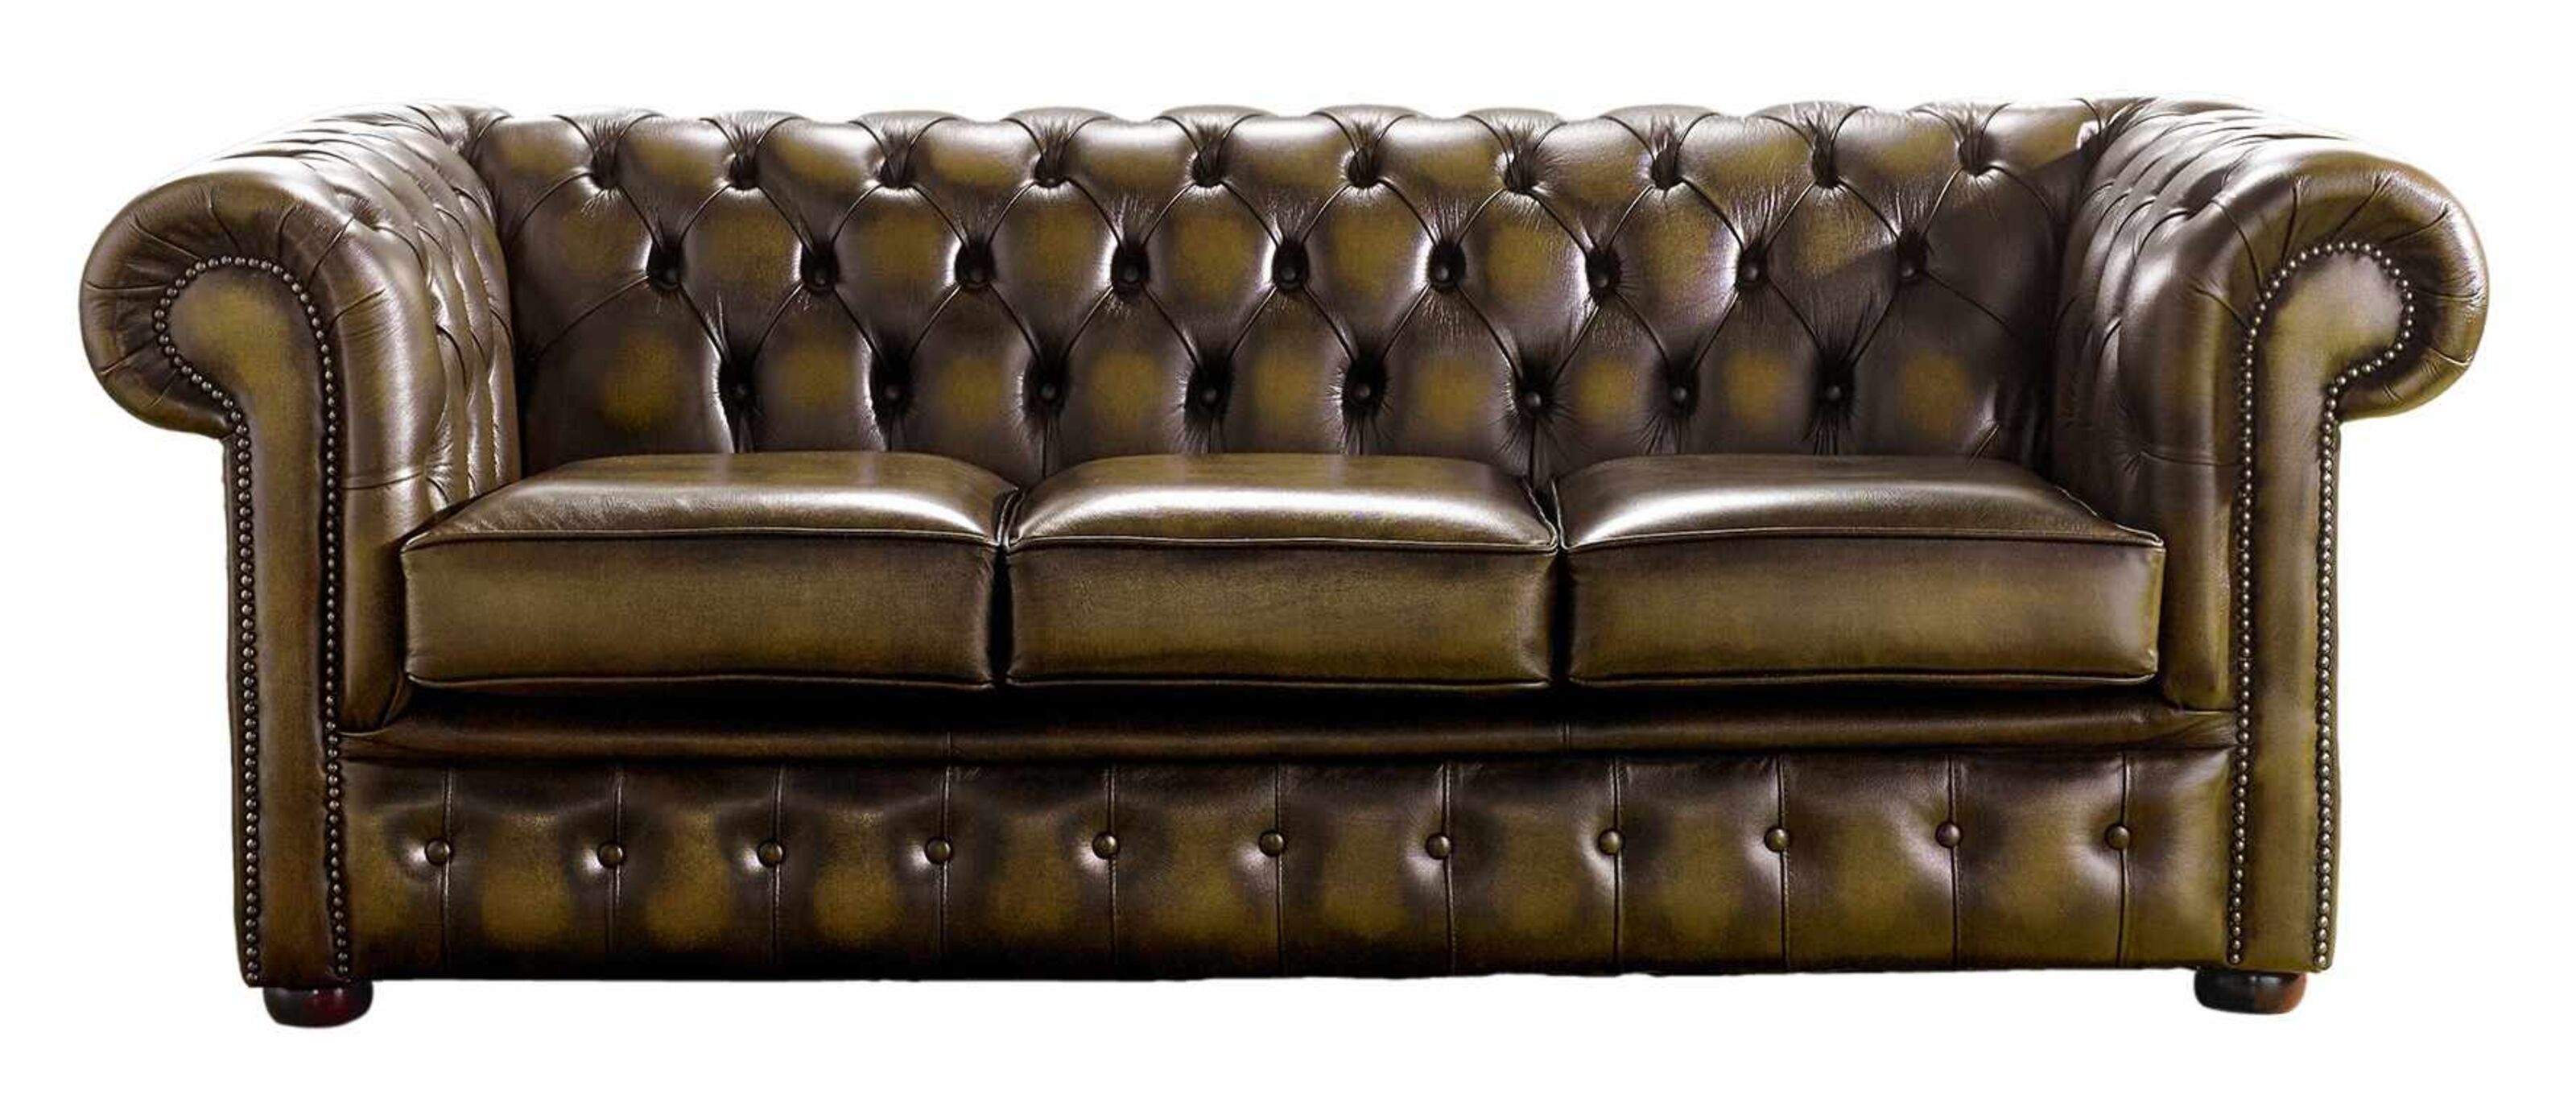 A Cozy Conversation About Luxurious Chesterfield Sofas  %Post Title